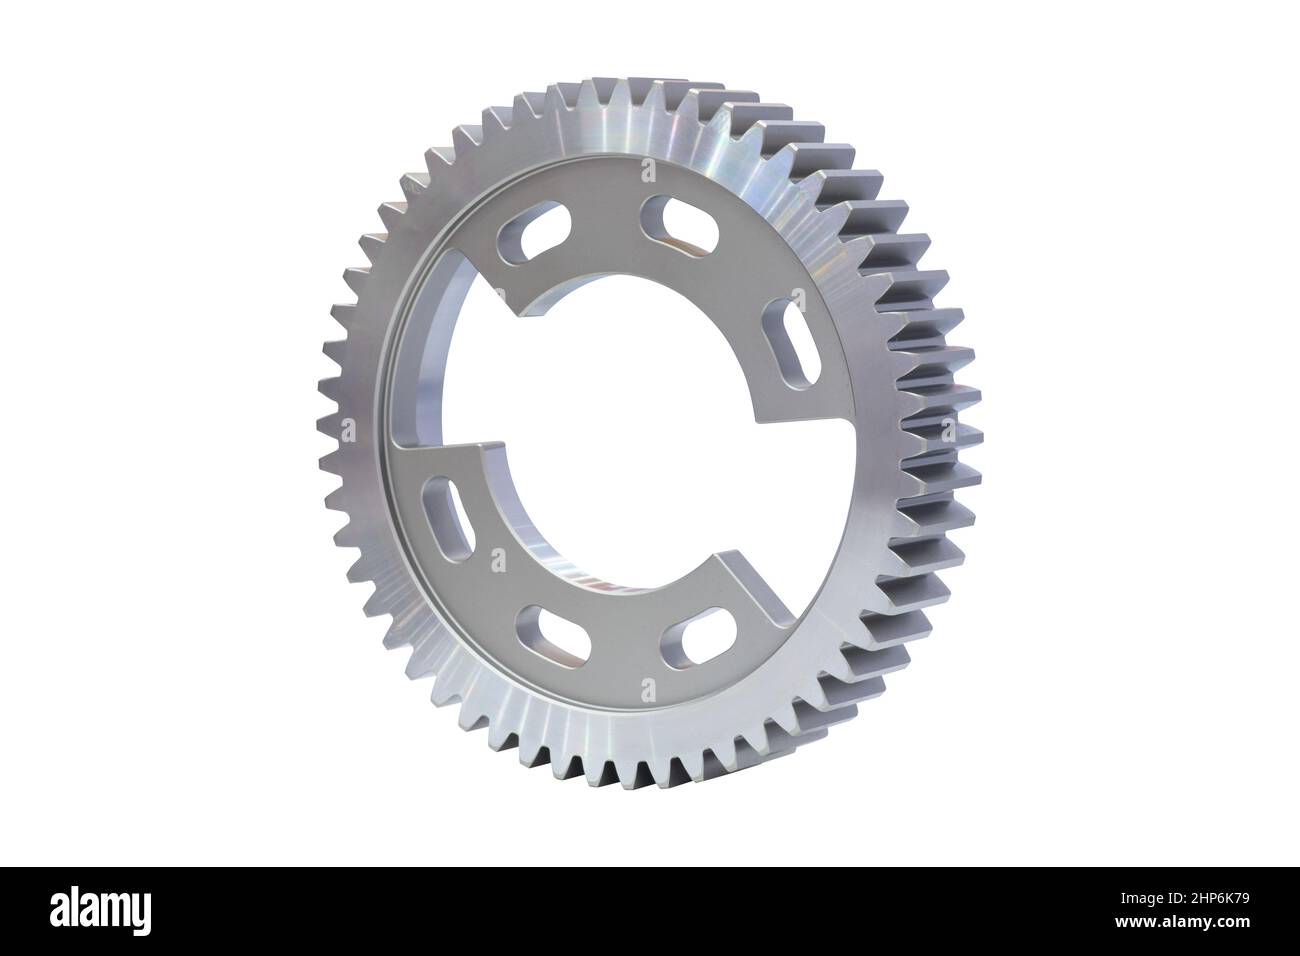 Industrial metal gear cog part, a cog made from metal material for use on machinery or vehicles, isolated on white background Stock Photo